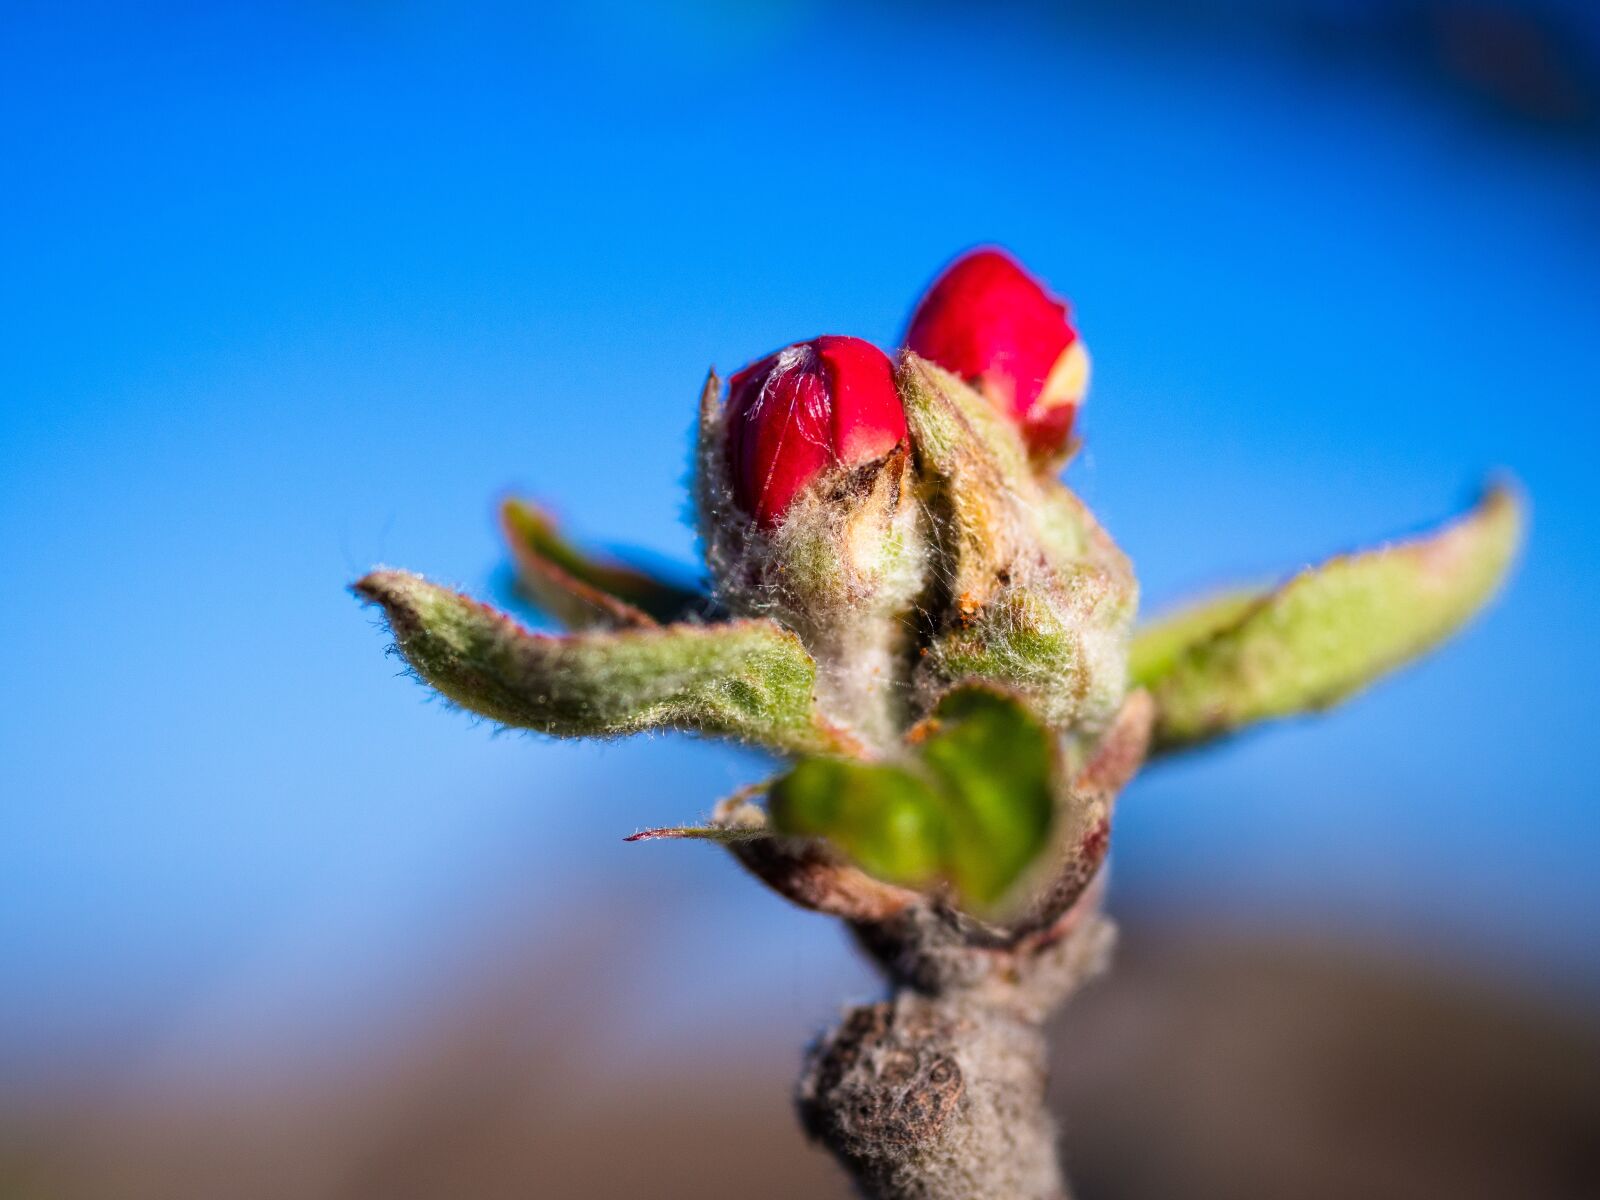 Olympus PEN E-PL9 sample photo. Flower buds, red, spring photography